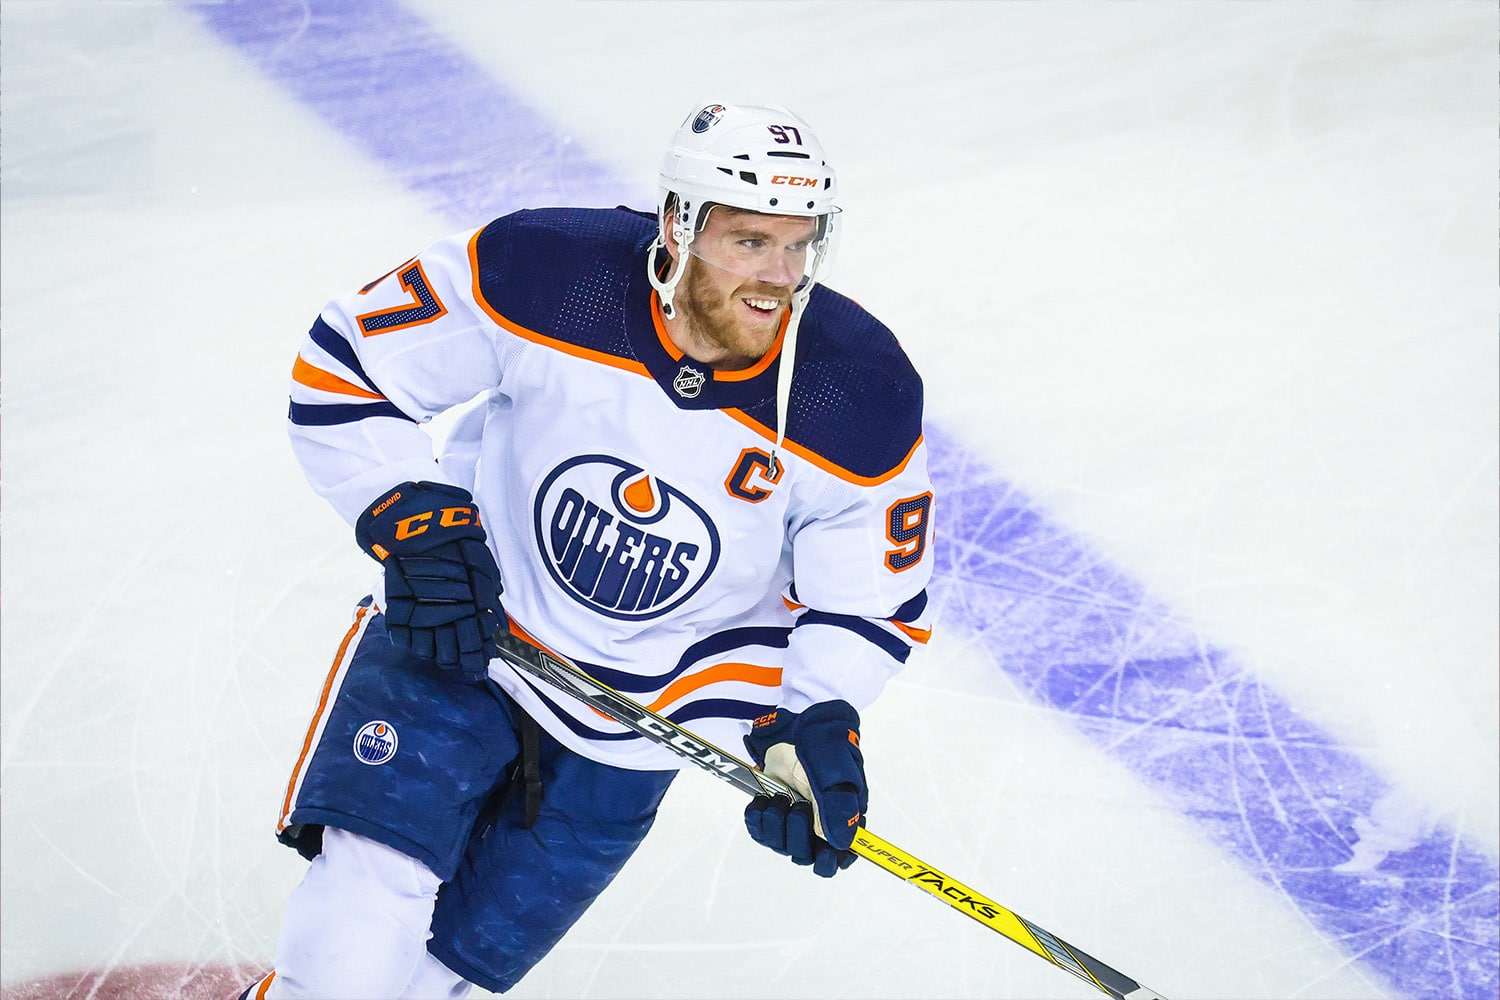 Connor McDavid becomes sixth NHL player to record 150 or more